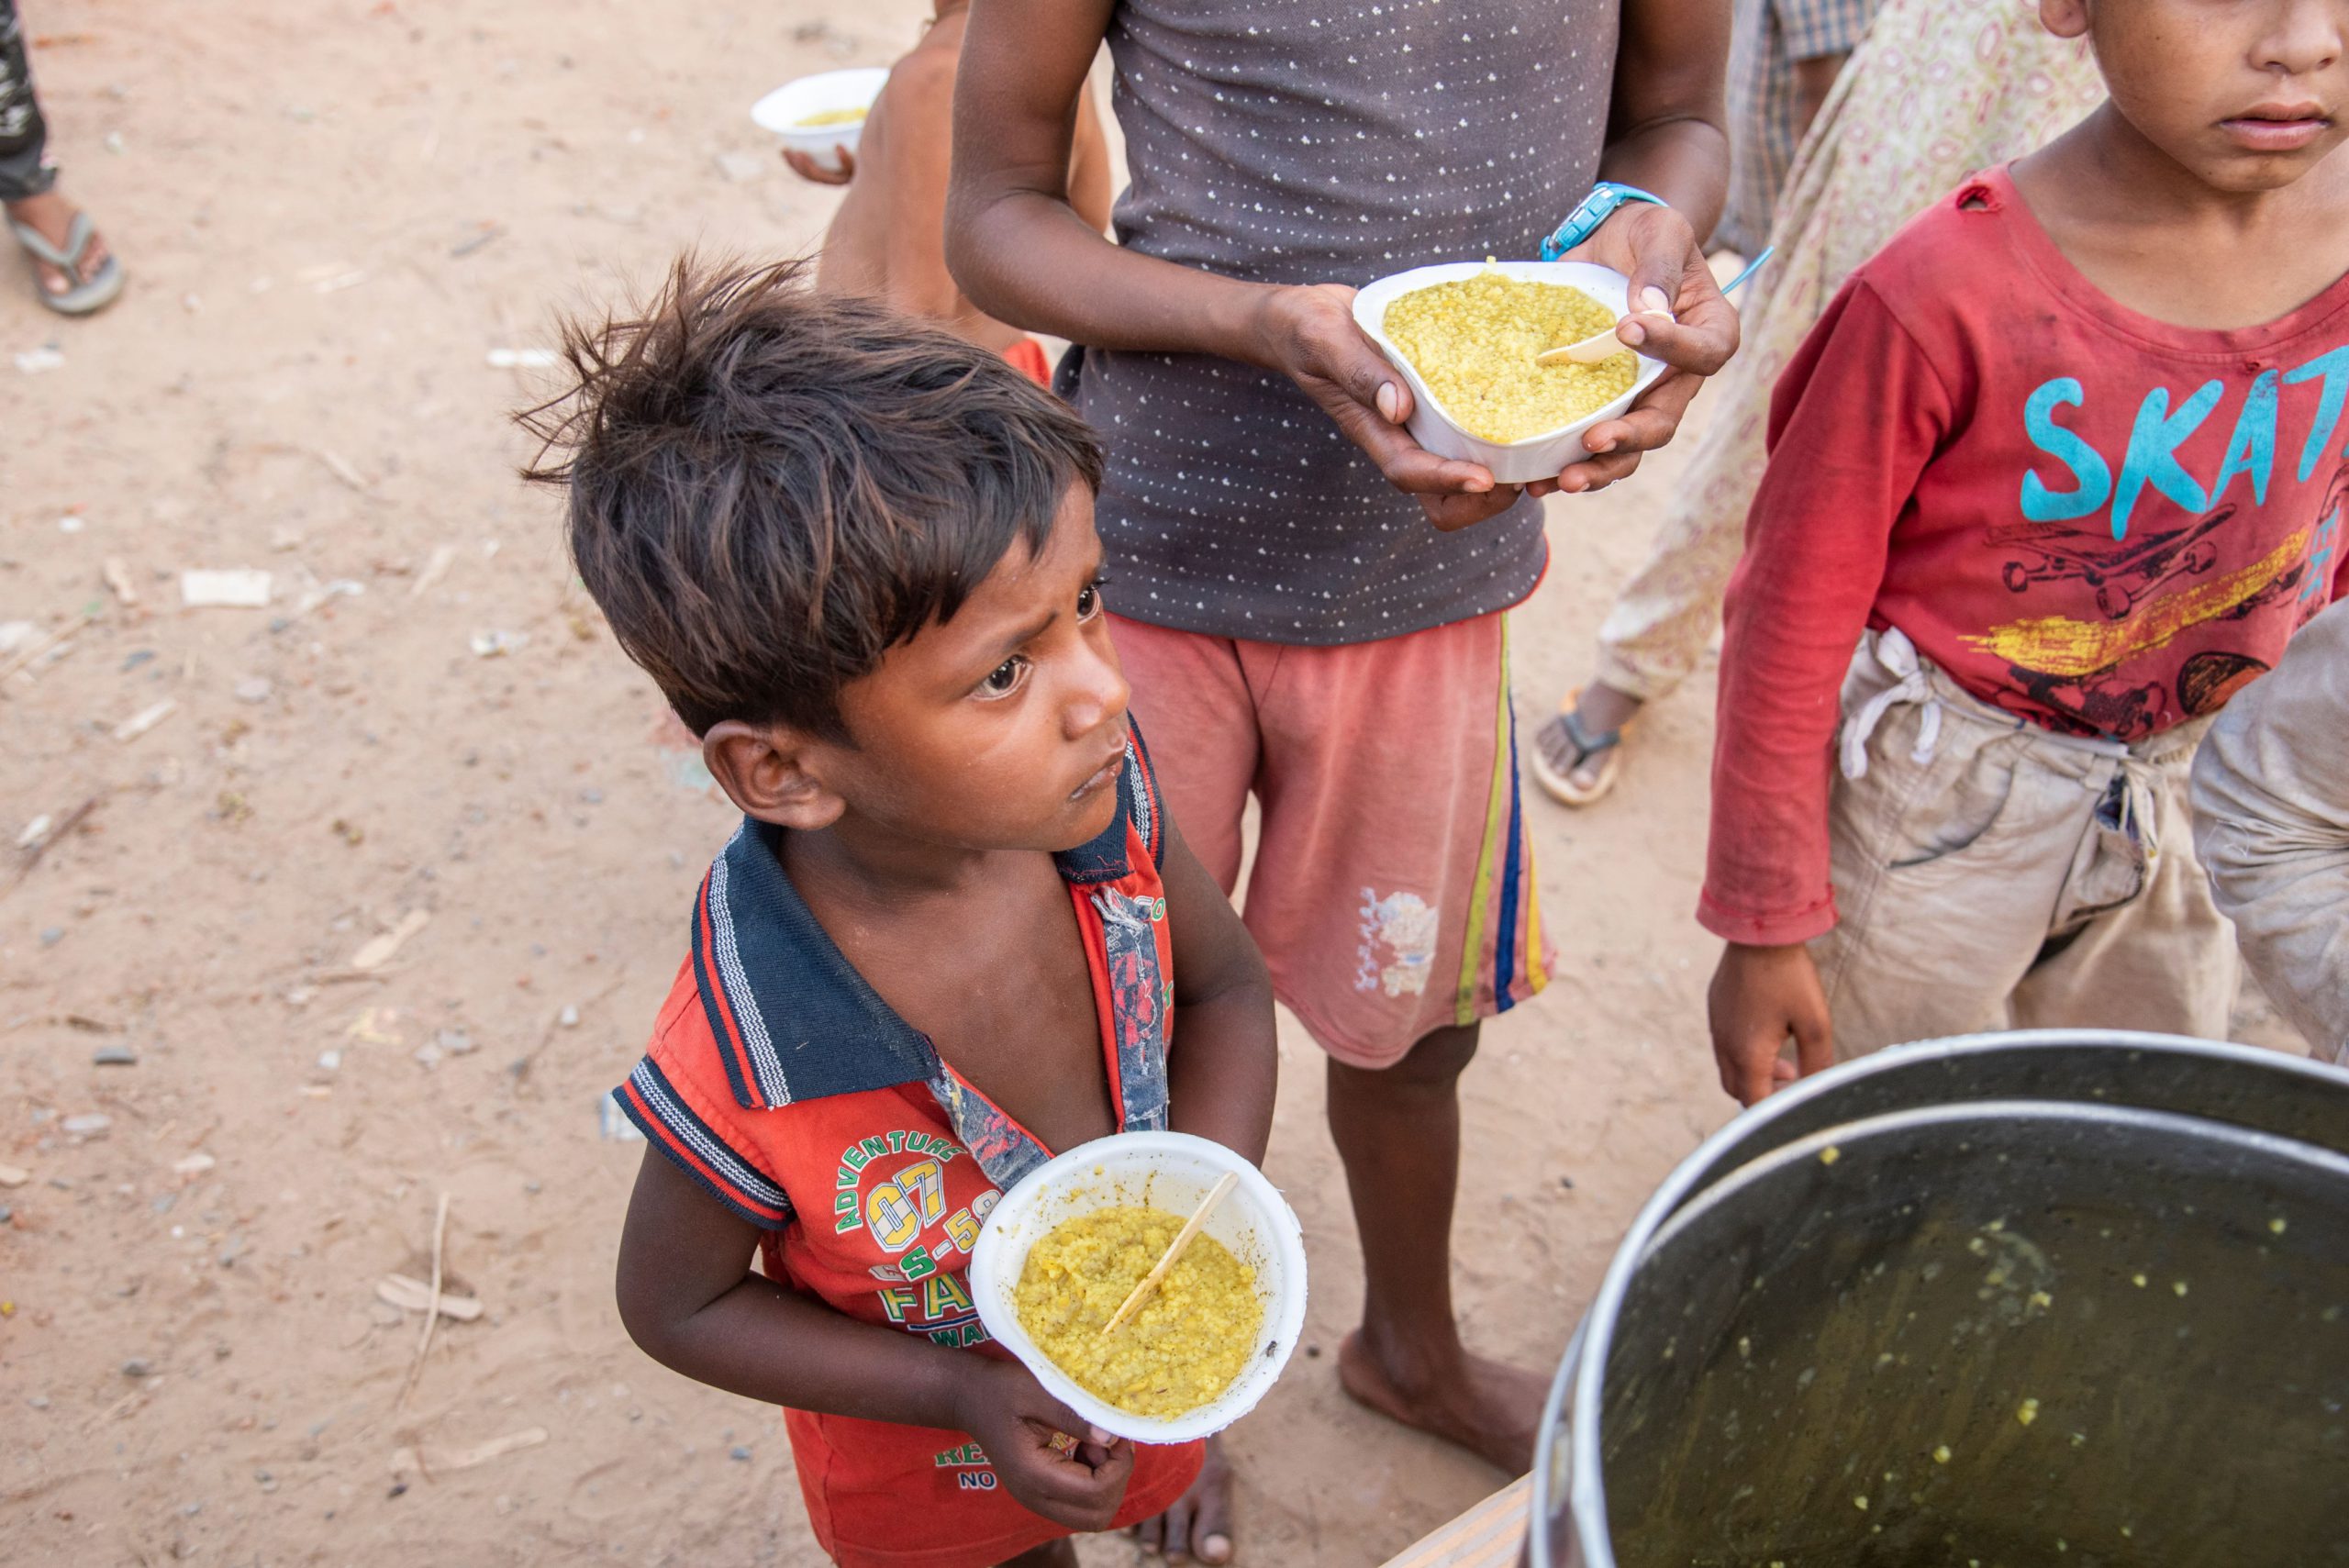 Malnutrition in kids is a reality that we cannot ignore in India on World Food Safety Day.